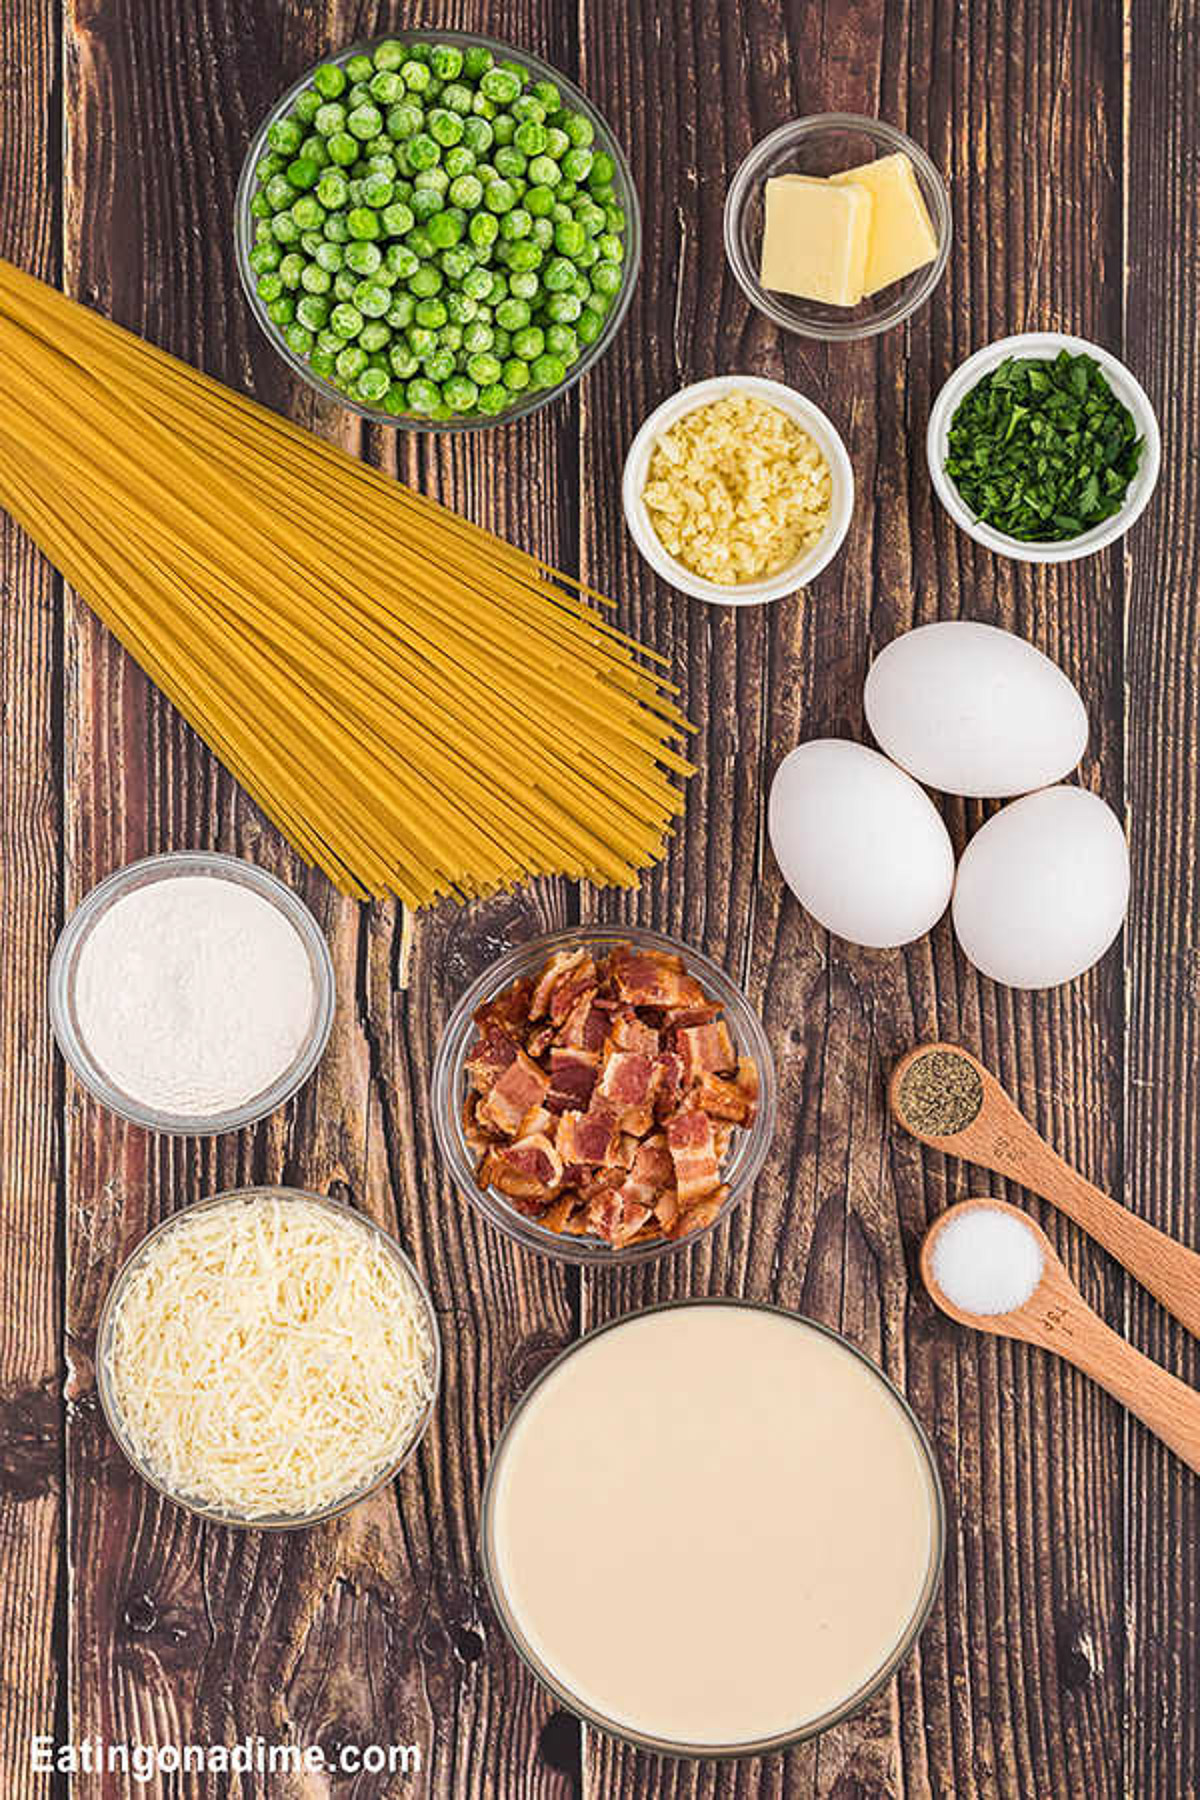 Ingredients for Cheesecake factory pasta carbonara. Spaghetti noodles, frozen peas, bacon, butter, garlic, eggs, parmesan cheese, flour, evaporated milk, salt and pepper, parsley